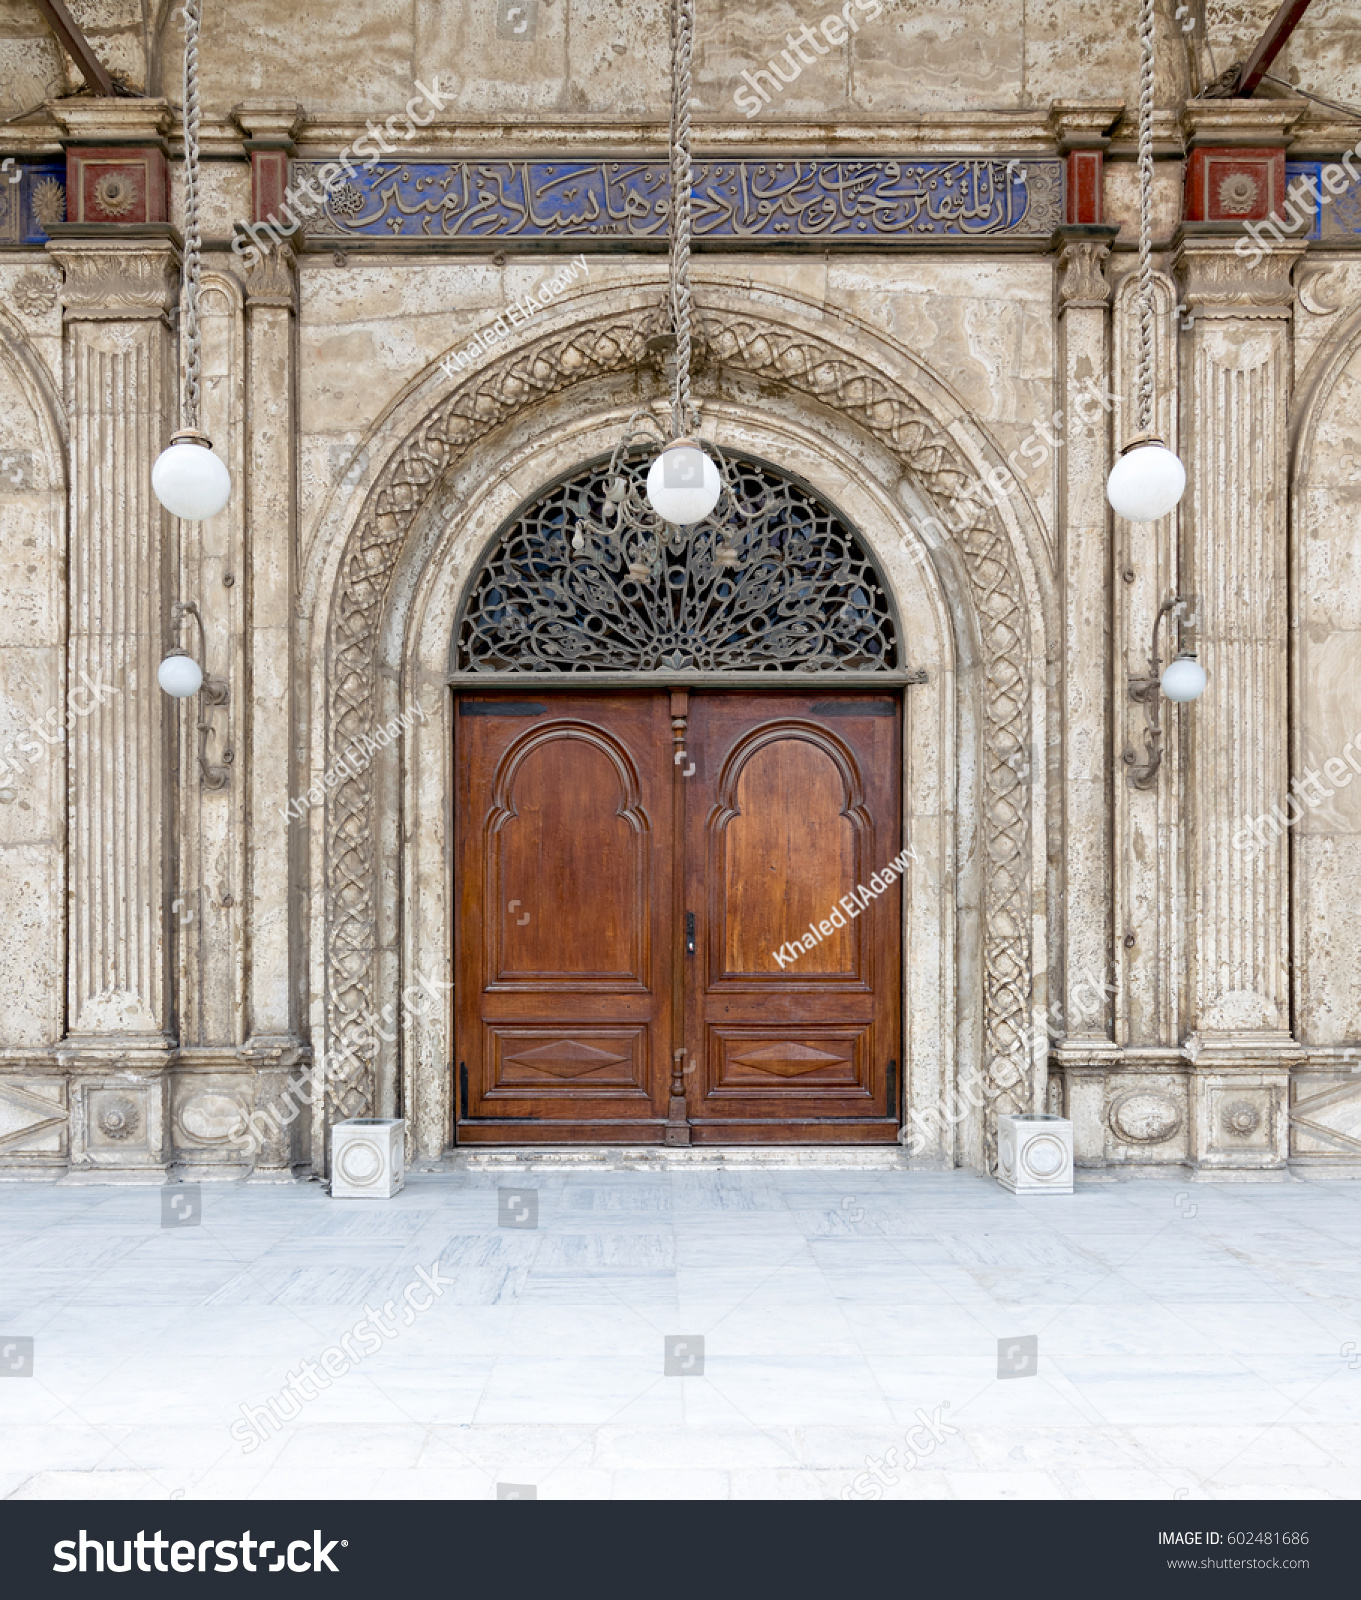 Exterior Shot Wooden Ornate Arched Door Stock Photo (Royalty Free ...